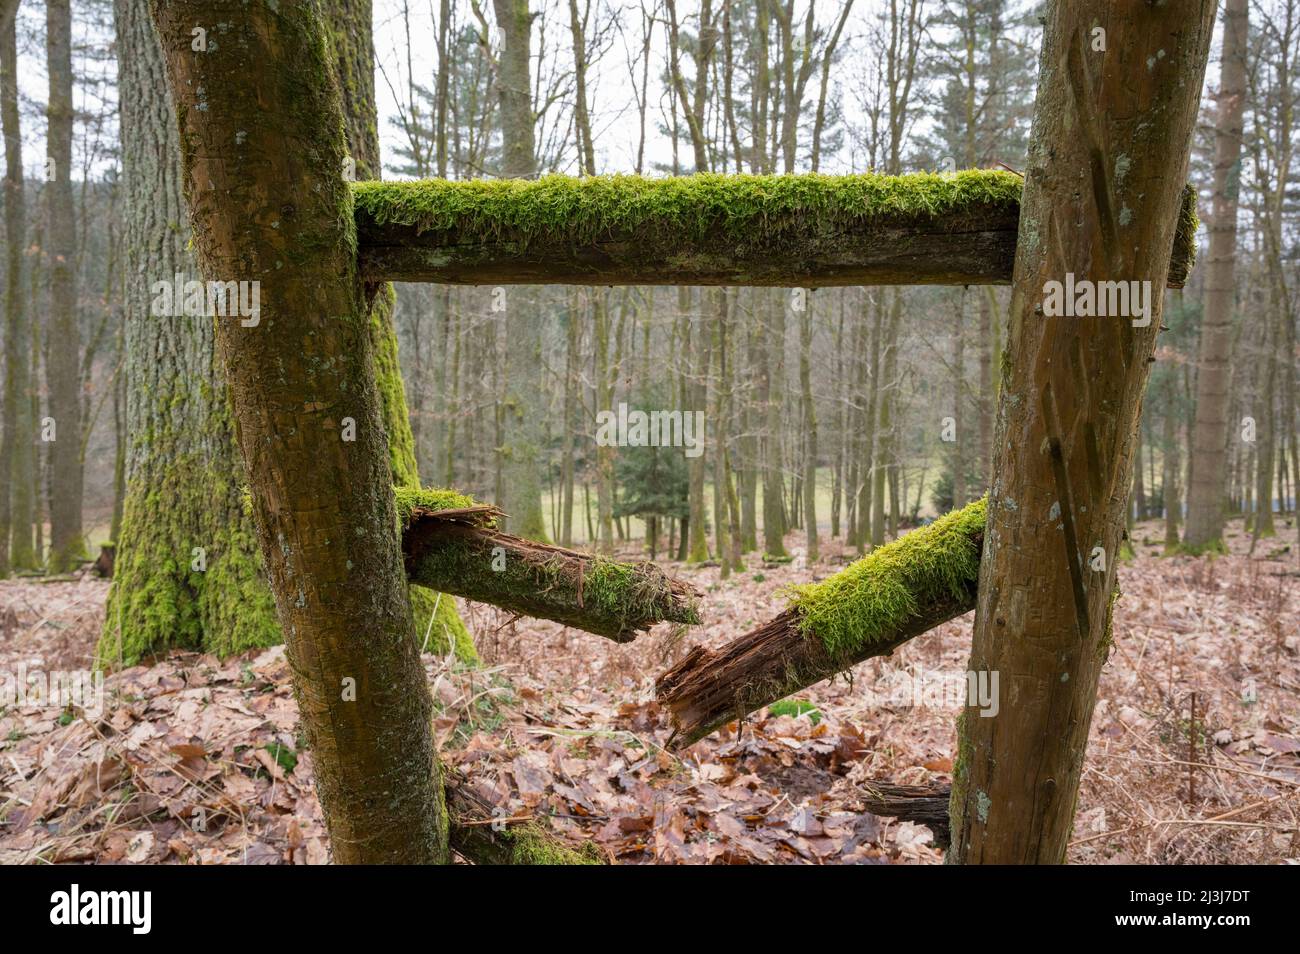 Broken ladder rung on an old high seat, January, Spessart, Hesse, Germany, Europe Stock Photo